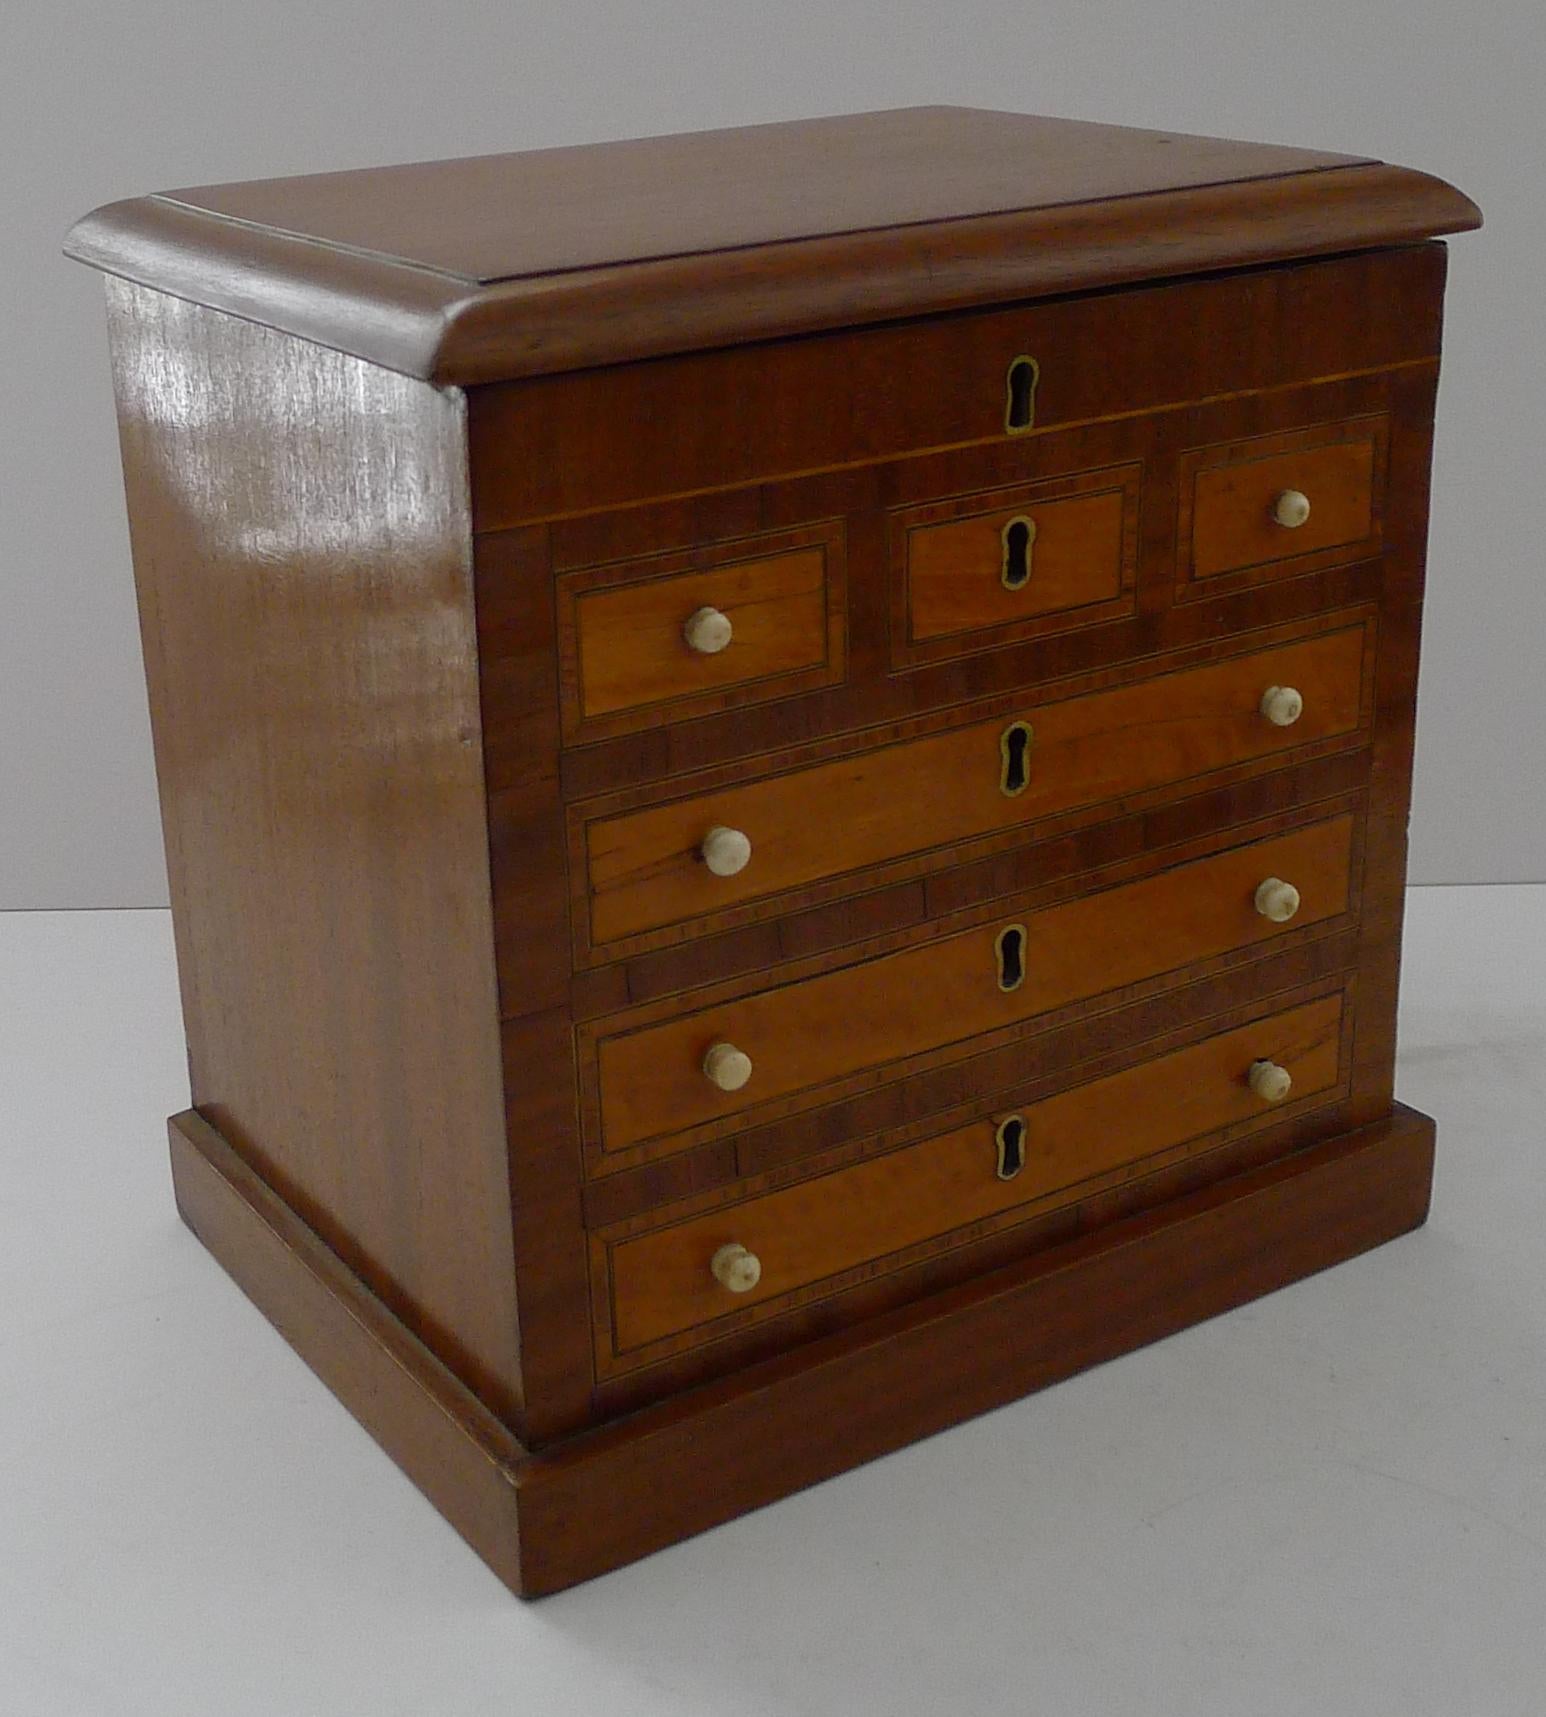 Rare English Mahogany Tea Caddy - Form of Chest of Drawers c.1880 In Good Condition For Sale In Bath, GB